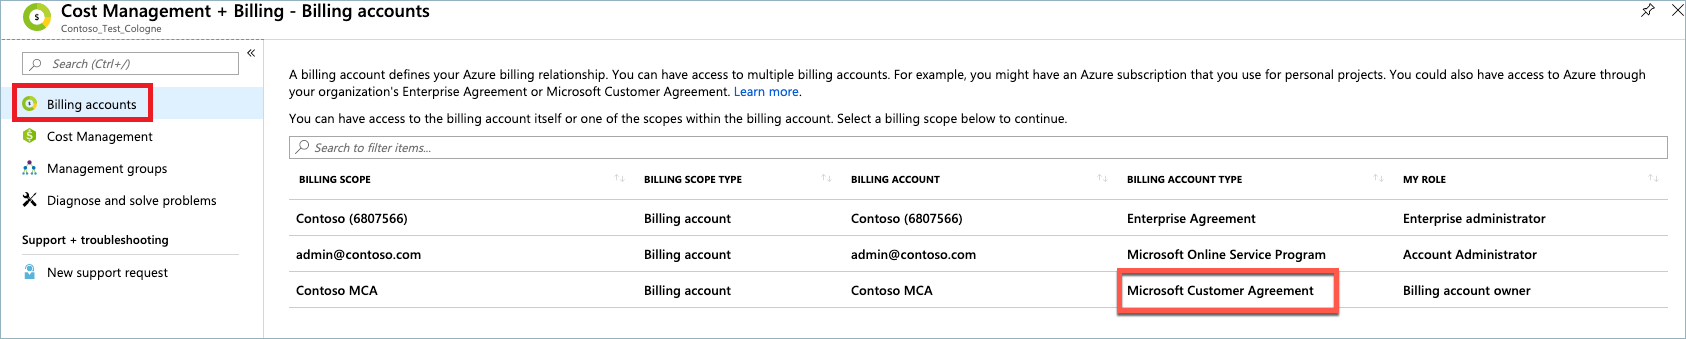 Screenshot showing the Microsoft Customer Agreement type on the Billing Accounts page.